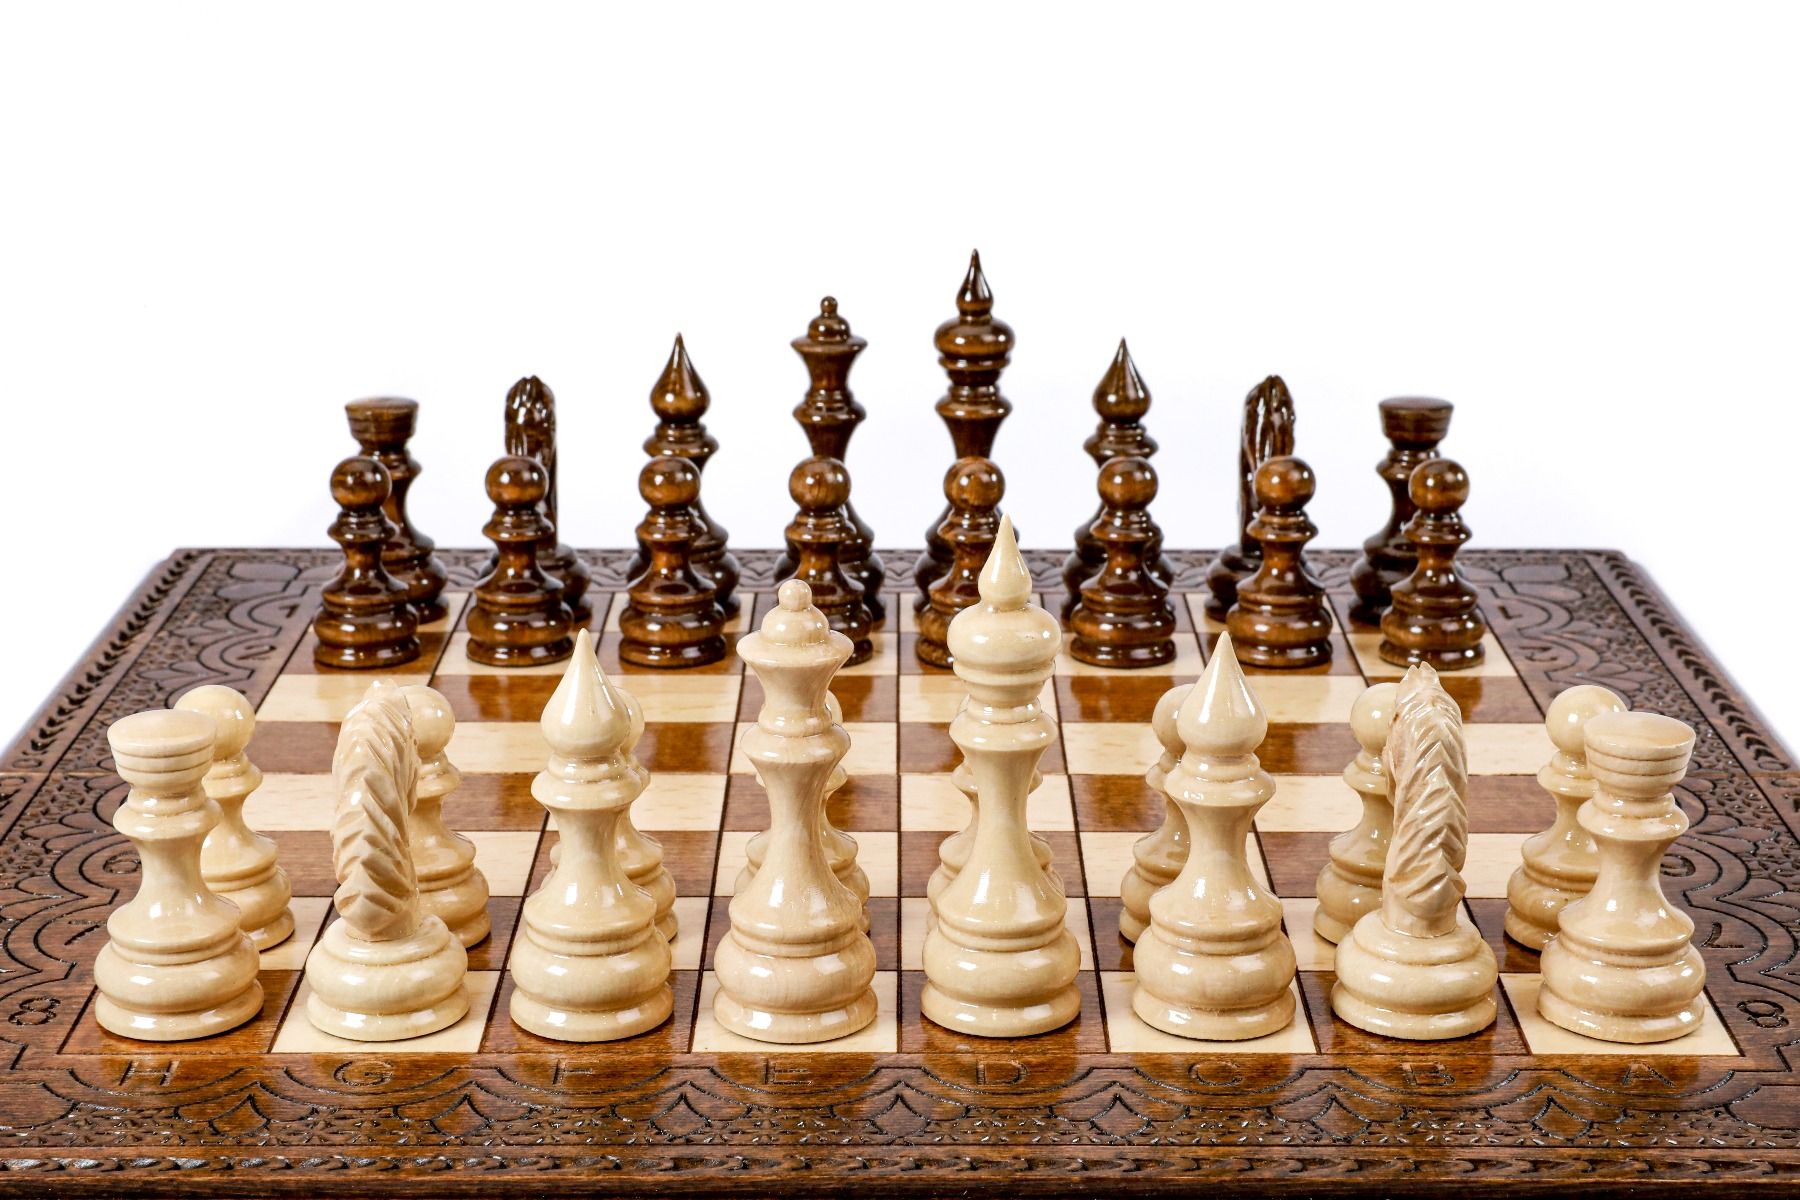 Experience the beauty of a handcrafted wooden chess set, where traditional forms are enhanced with unique design elements for a truly classic game.